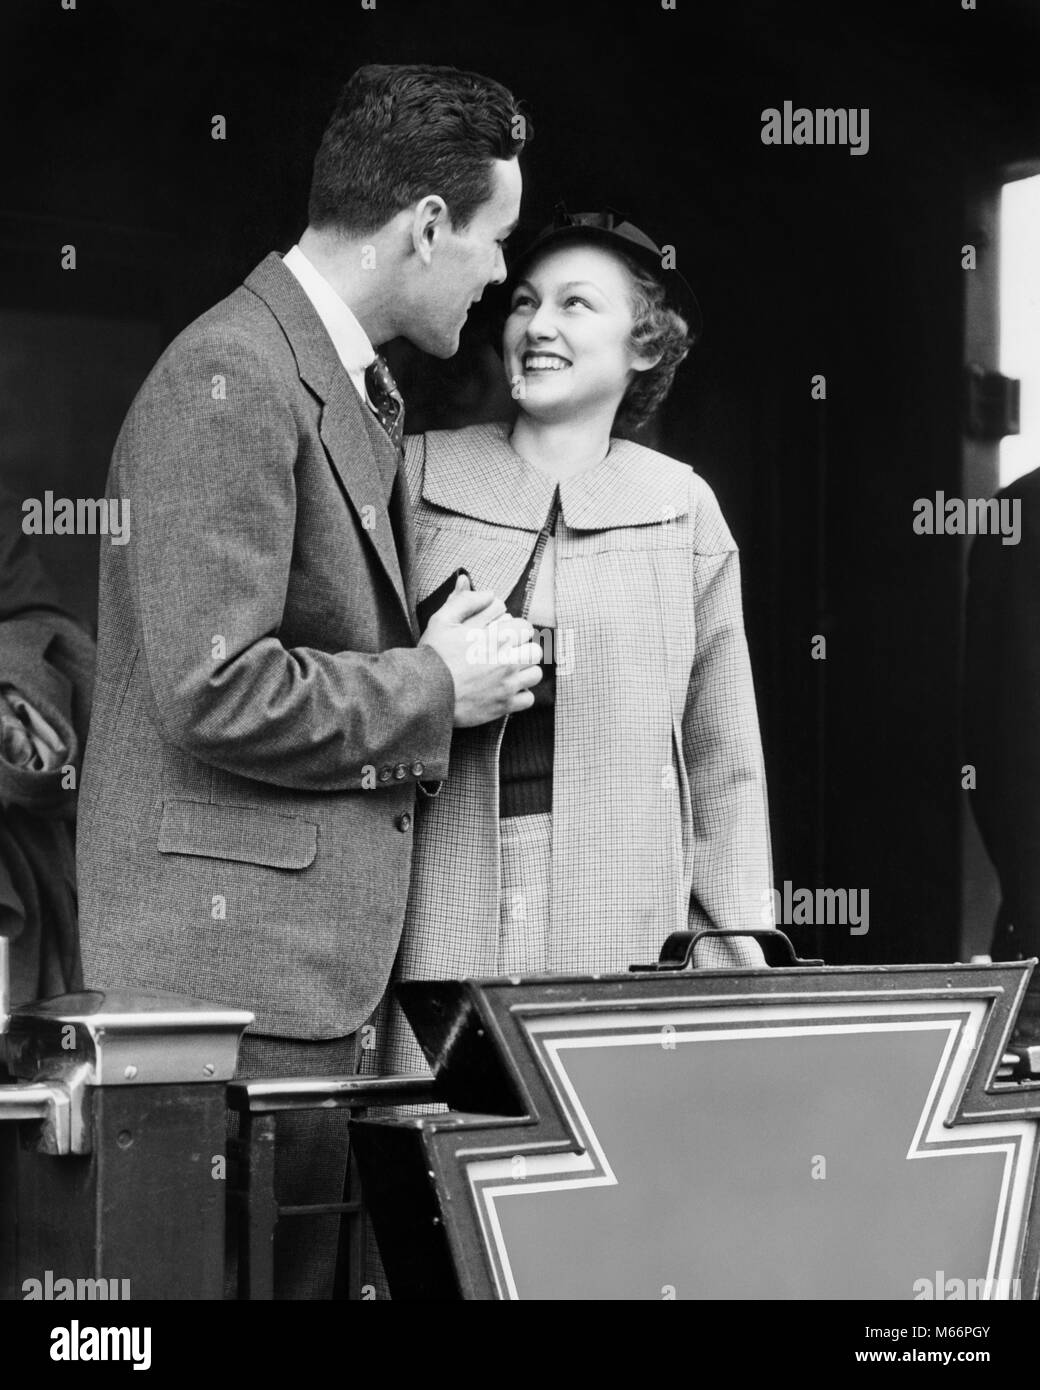 1930s SMILING COUPLE MAN WOMAN HOLDING HANDS STANDING ON REAR PLATFORM OF TRAIN OBSERVATION CAR - r6017 HAR001 HARS RAILROAD PLEASED JOY LIFESTYLE CELEBRATION FEMALES HUSBANDS HEALTHINESS LUXURY COPY SPACE FRIENDSHIP HALF-LENGTH LADIES CARING COUPLES TRANSPORTATION NOSTALGIA TOGETHERNESS 20-25 YEARS 25-30 YEARS RAIL DREAMS PLATFORM WIVES HAPPINESS ADVENTURE STYLES TRIP EXCITEMENT 18-19 YEARS SMILES CONNECTION JOYFUL FASHIONS ESCAPE RAILROADS CABOOSE HONEYMOON MALES NEWLYWEDS YOUNG ADULT MAN YOUNG ADULT WOMAN B&W BLACK AND WHITE CAUCASIAN ETHNICITY OLD FASHIONED PERSONS Stock Photo